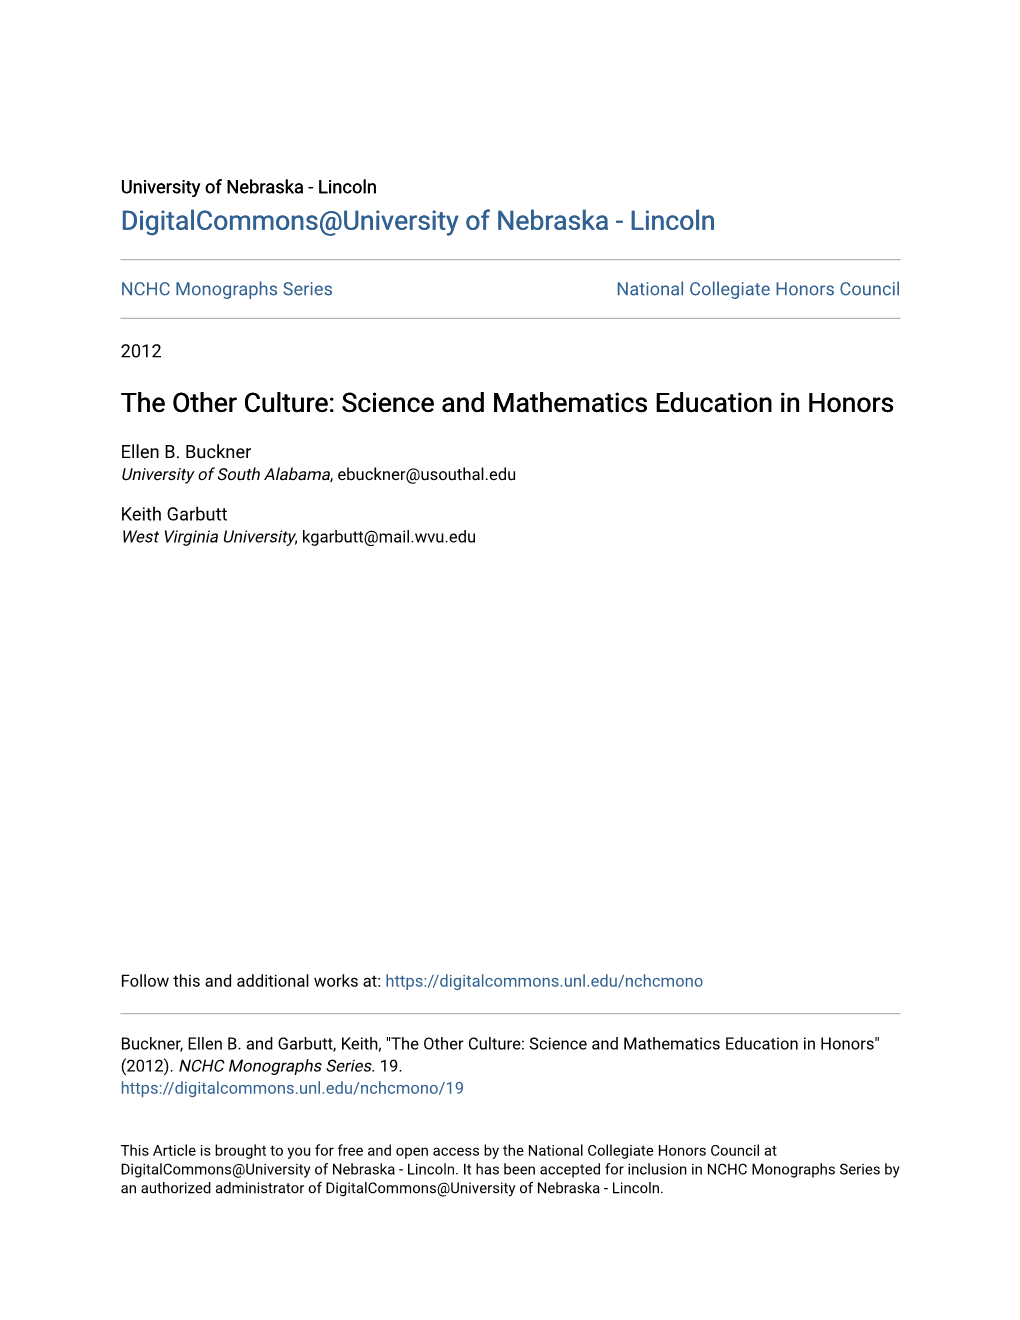 Science and Mathematics Education in Honors